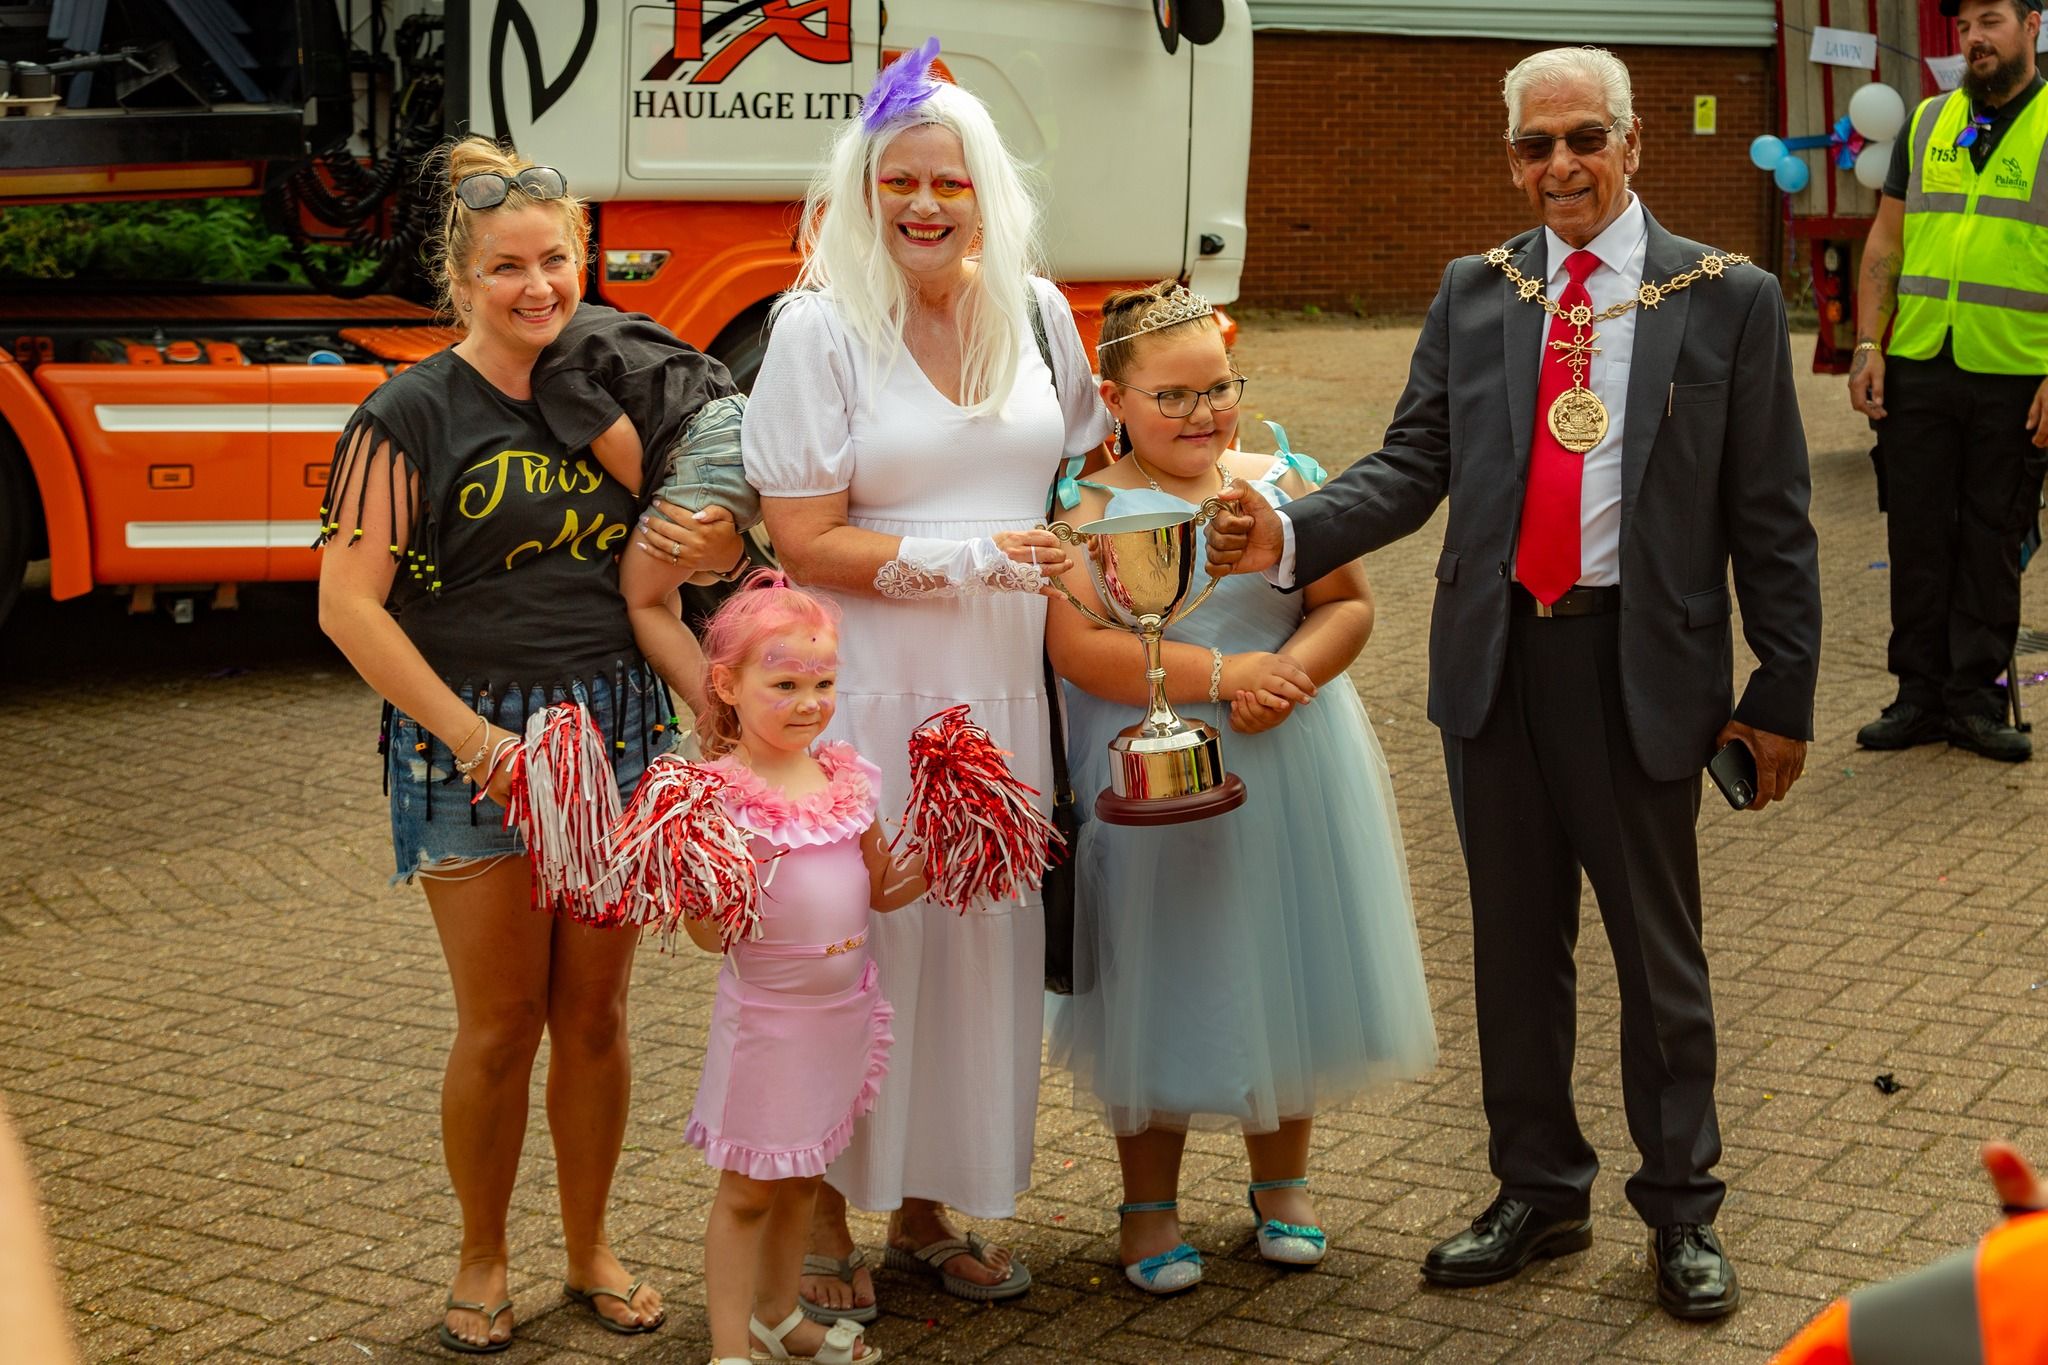 Nursery Practitioners Sarah Crowley and Lois Hutton collect their trophy from the Mayor of Gravesend Cllr Gurdip Ram Bungarjpg